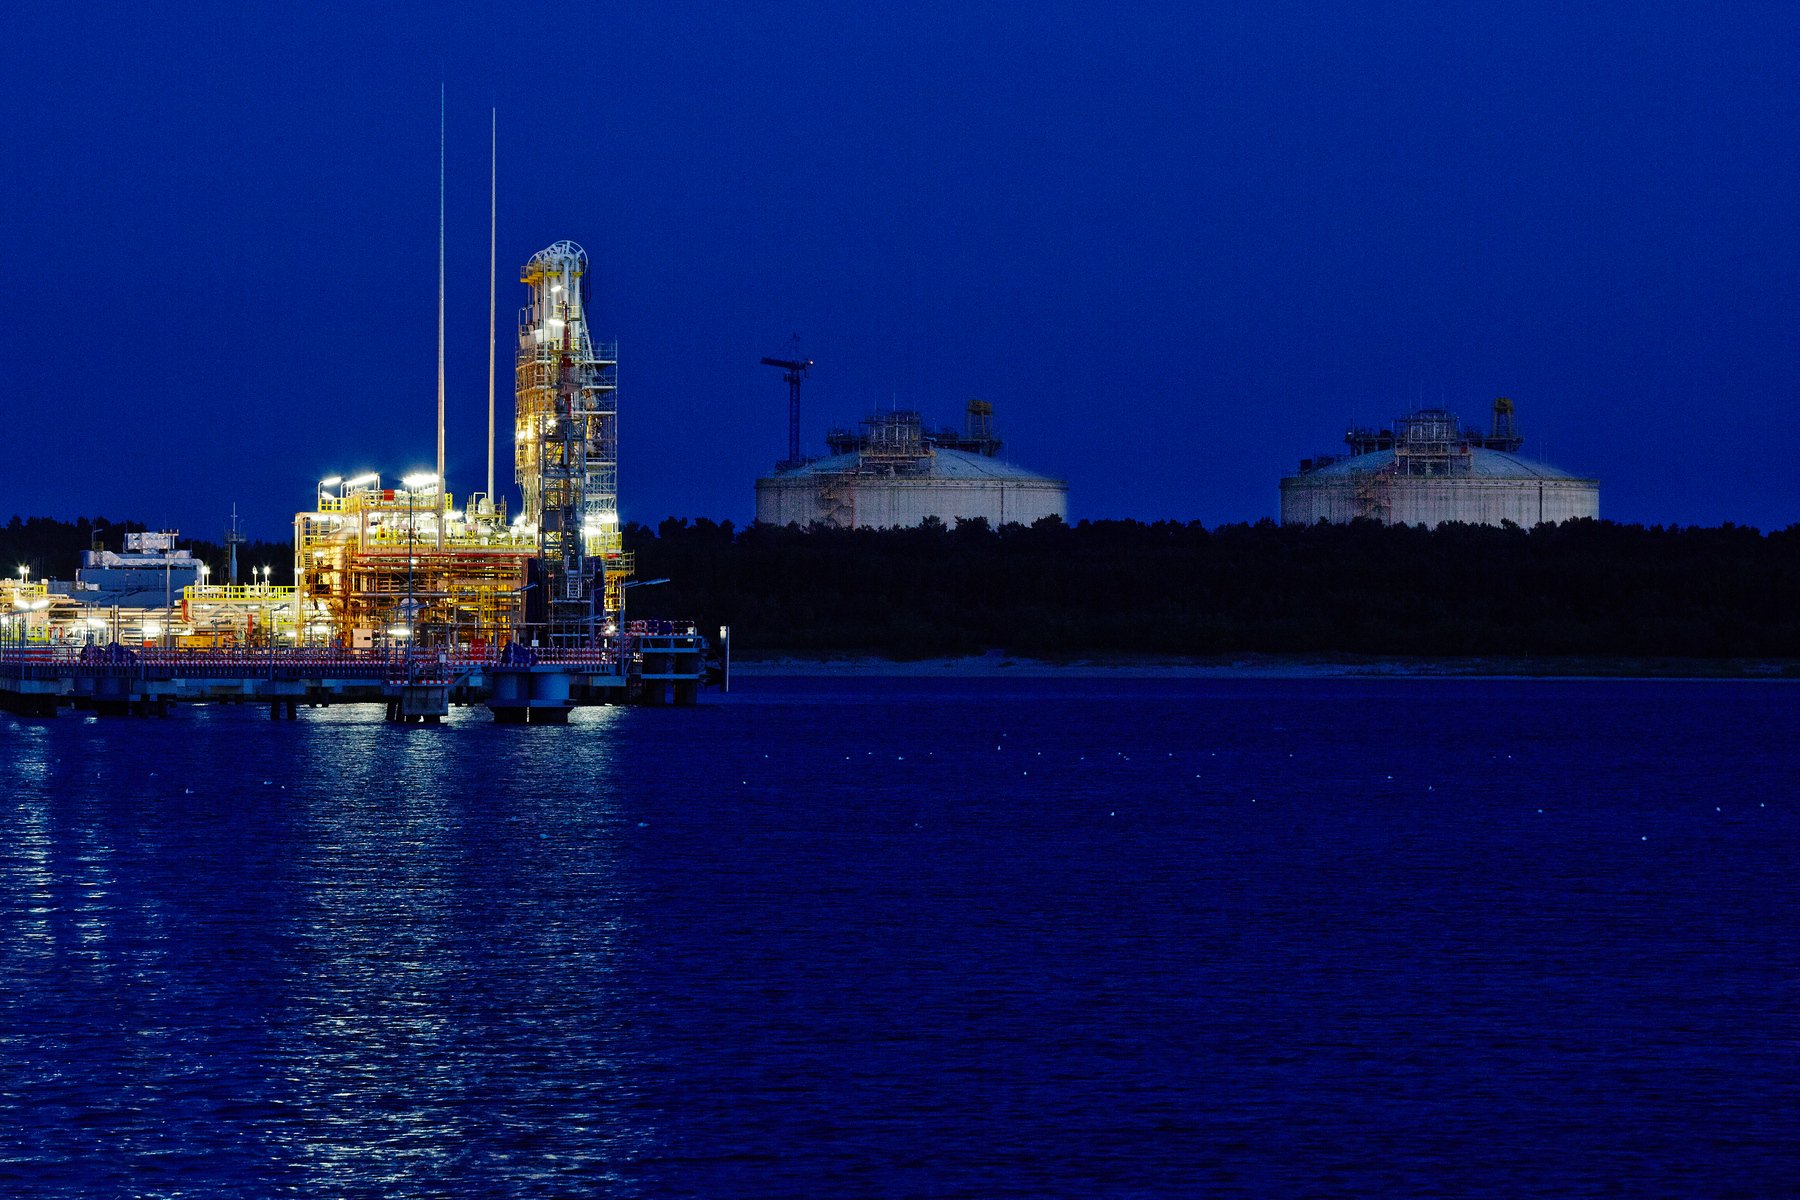 Polskie LNG contracts Tractebel as terminal expansion consultant